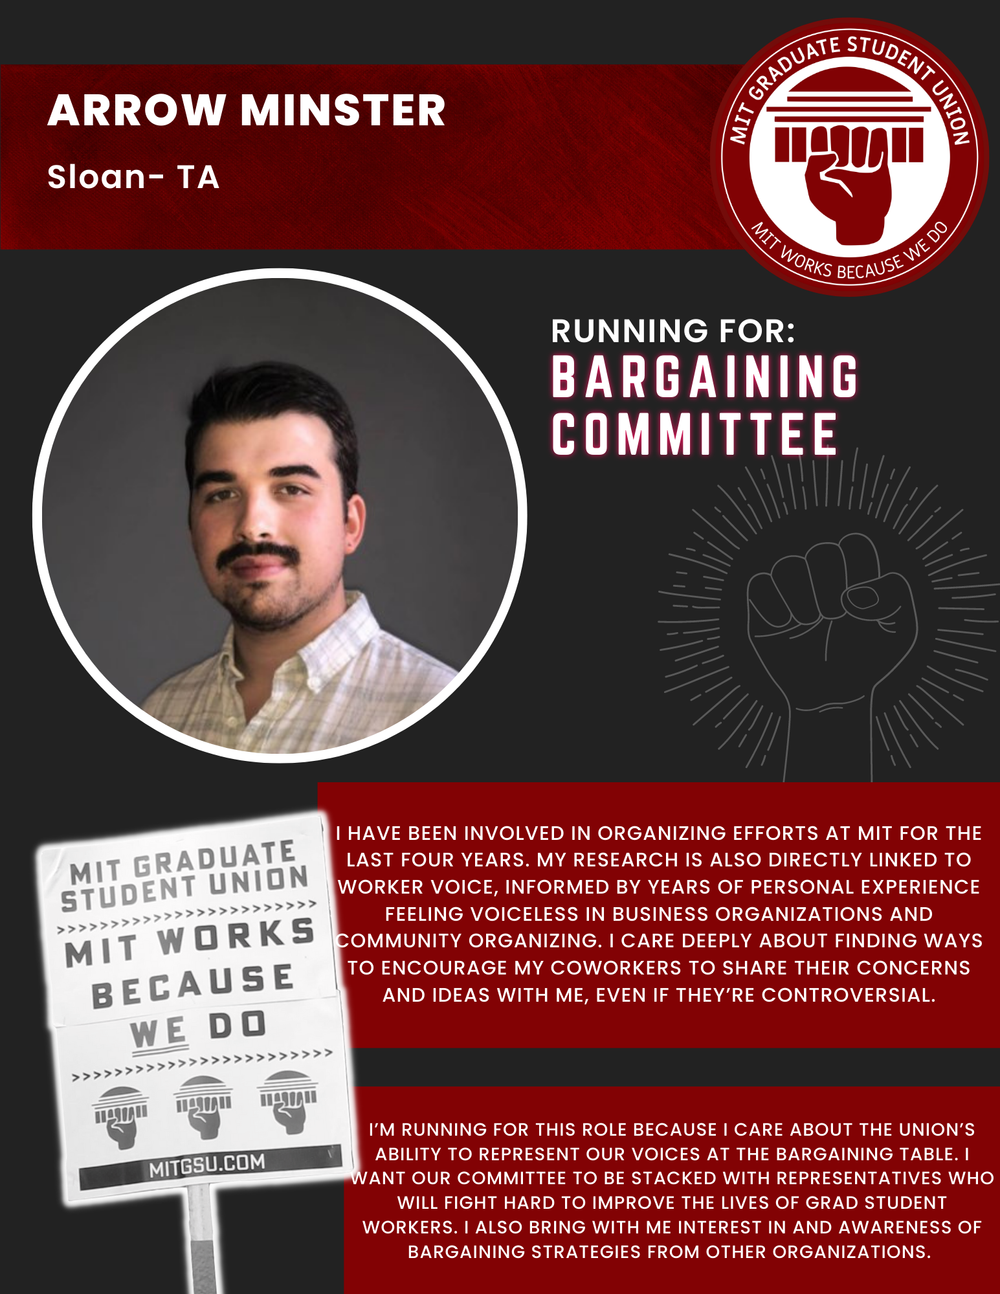  ARROW MINSTER  Sloan - TA  RUNNING FOR: Bargaining Committee  I HAVE BEEN INVOLVED IN ORGANIZING EFFORTS AT MIT FOR THE LAST FOUR YEARS. MY RESEARCH IS ALSO DIRECTLY LINKED TO WORKER VOICE, INFORMED BY YEARS OF PERSONAL EXPERIENCE FEELING VOICELESS 